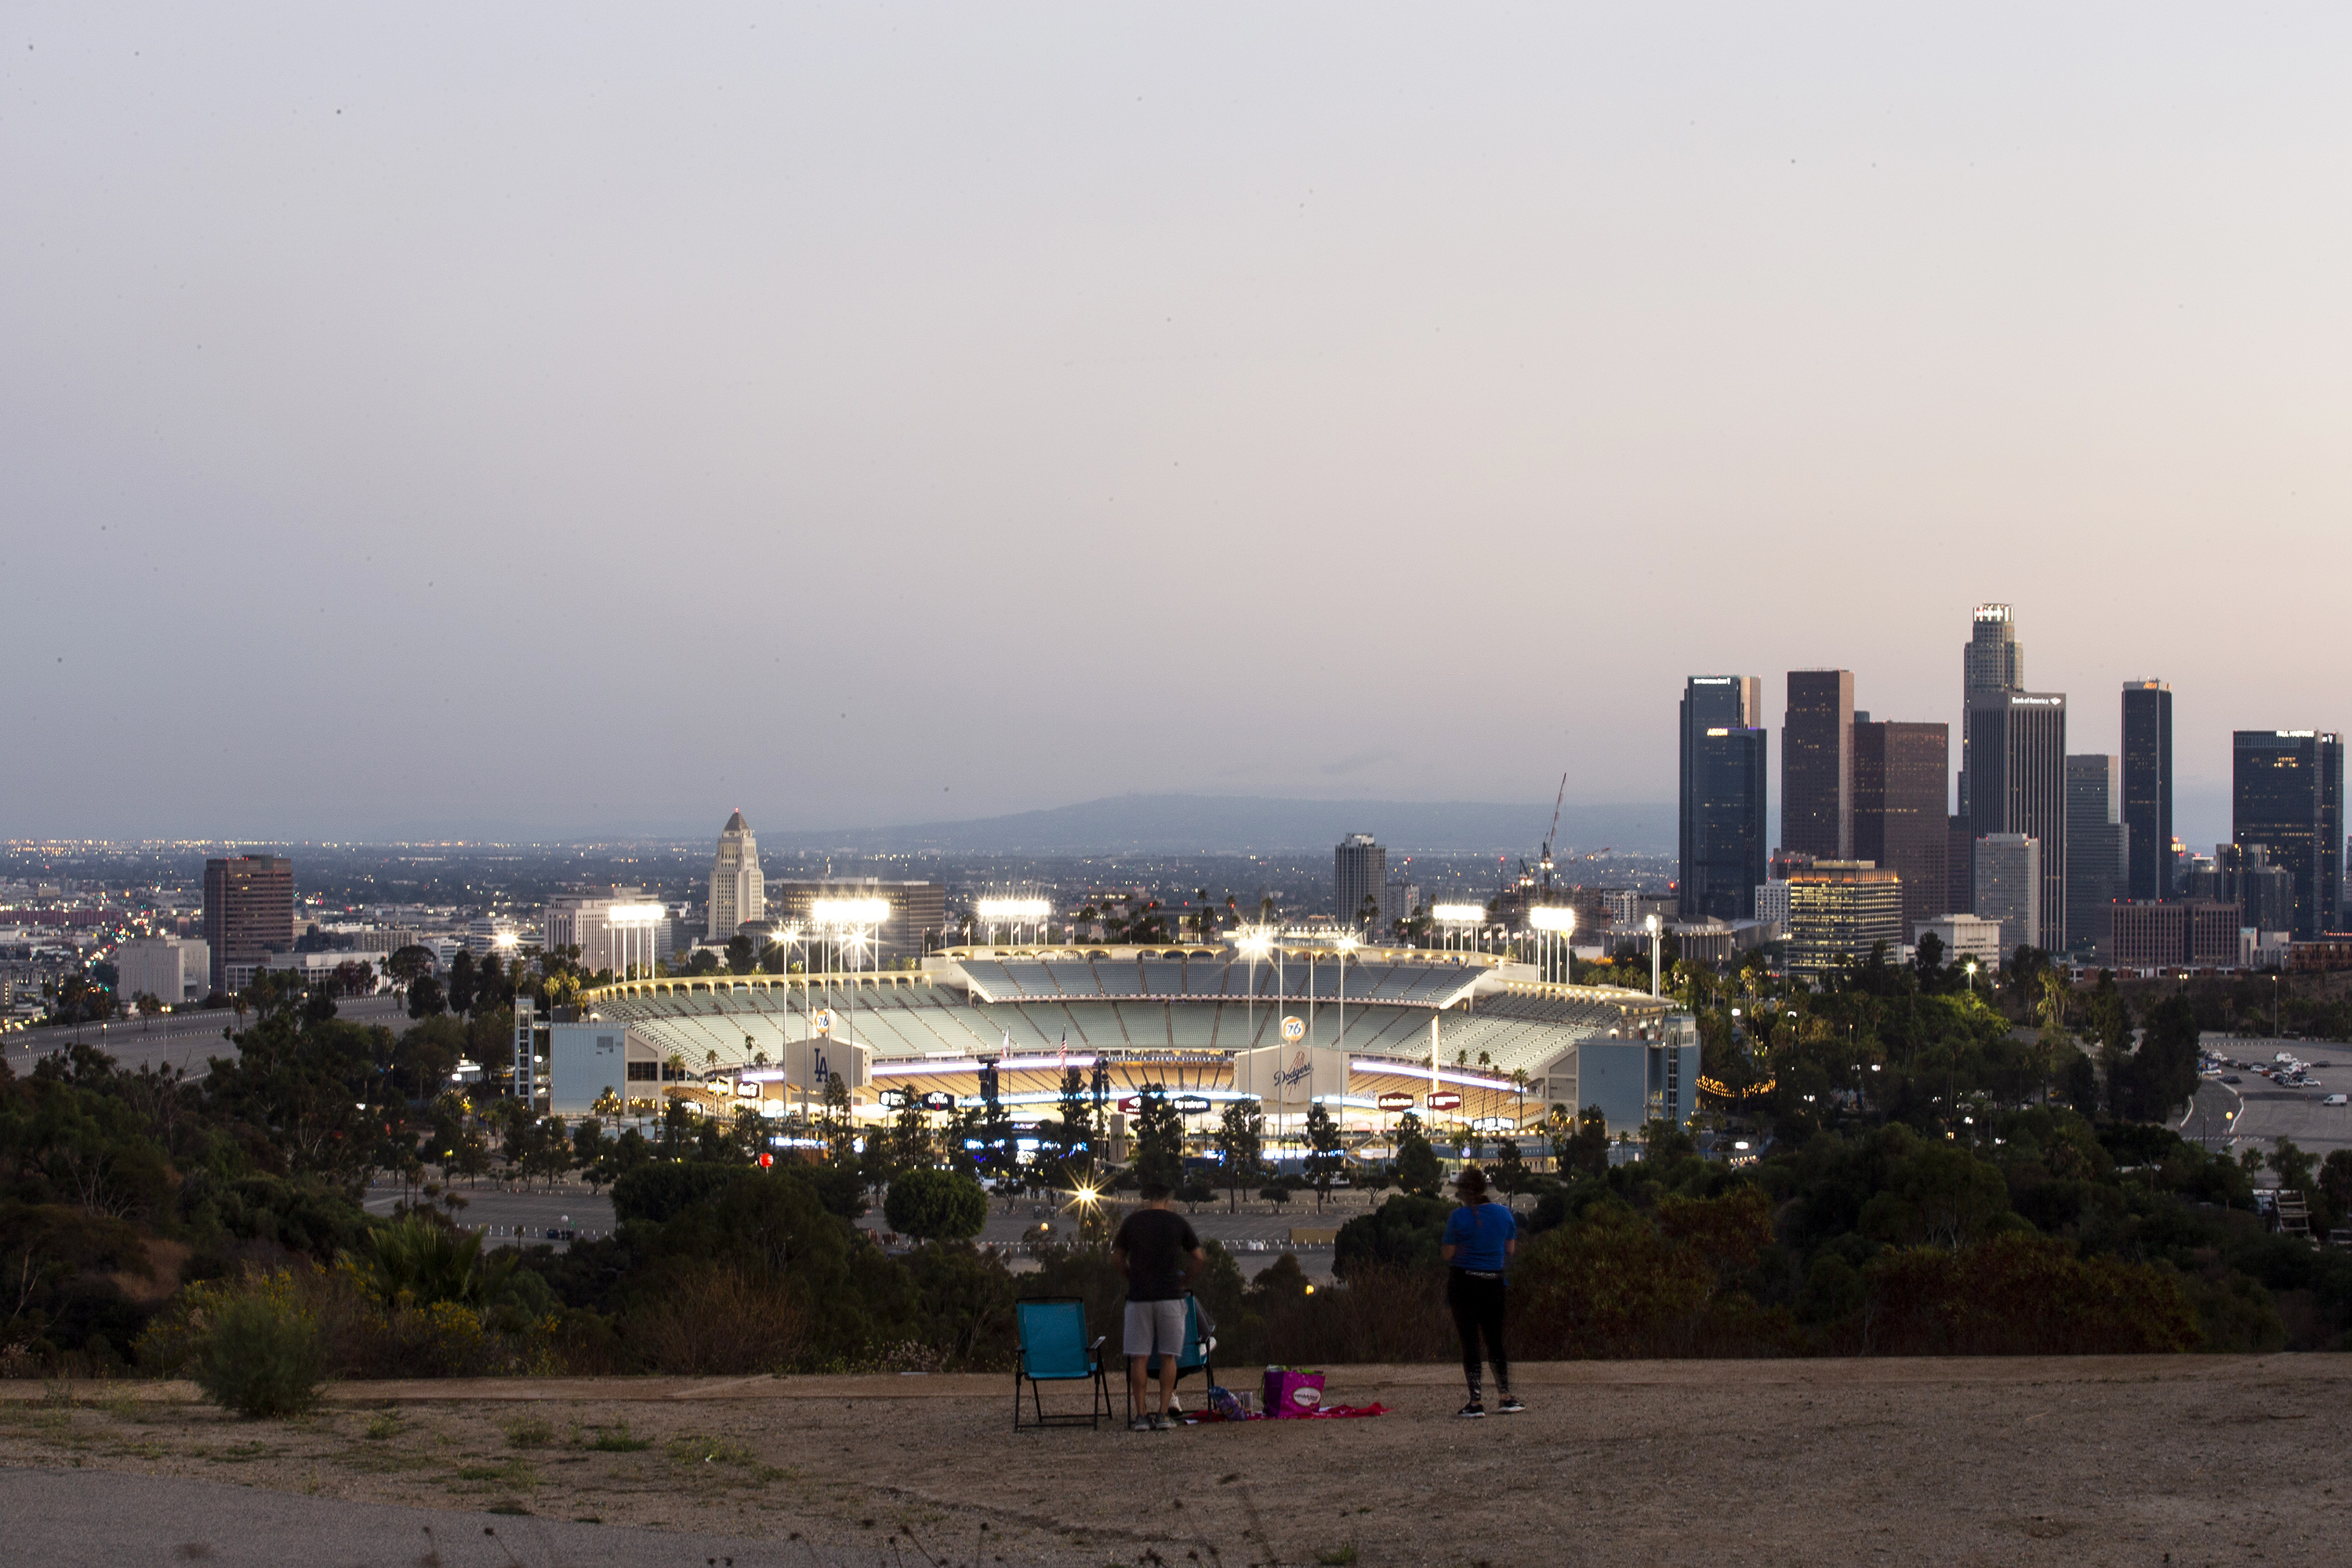 A family sits on chairs in a parking lot above the lights of Dodger Stadium, where teams are playing but no fans are in the stand, with the skyline of downtown LA behind.